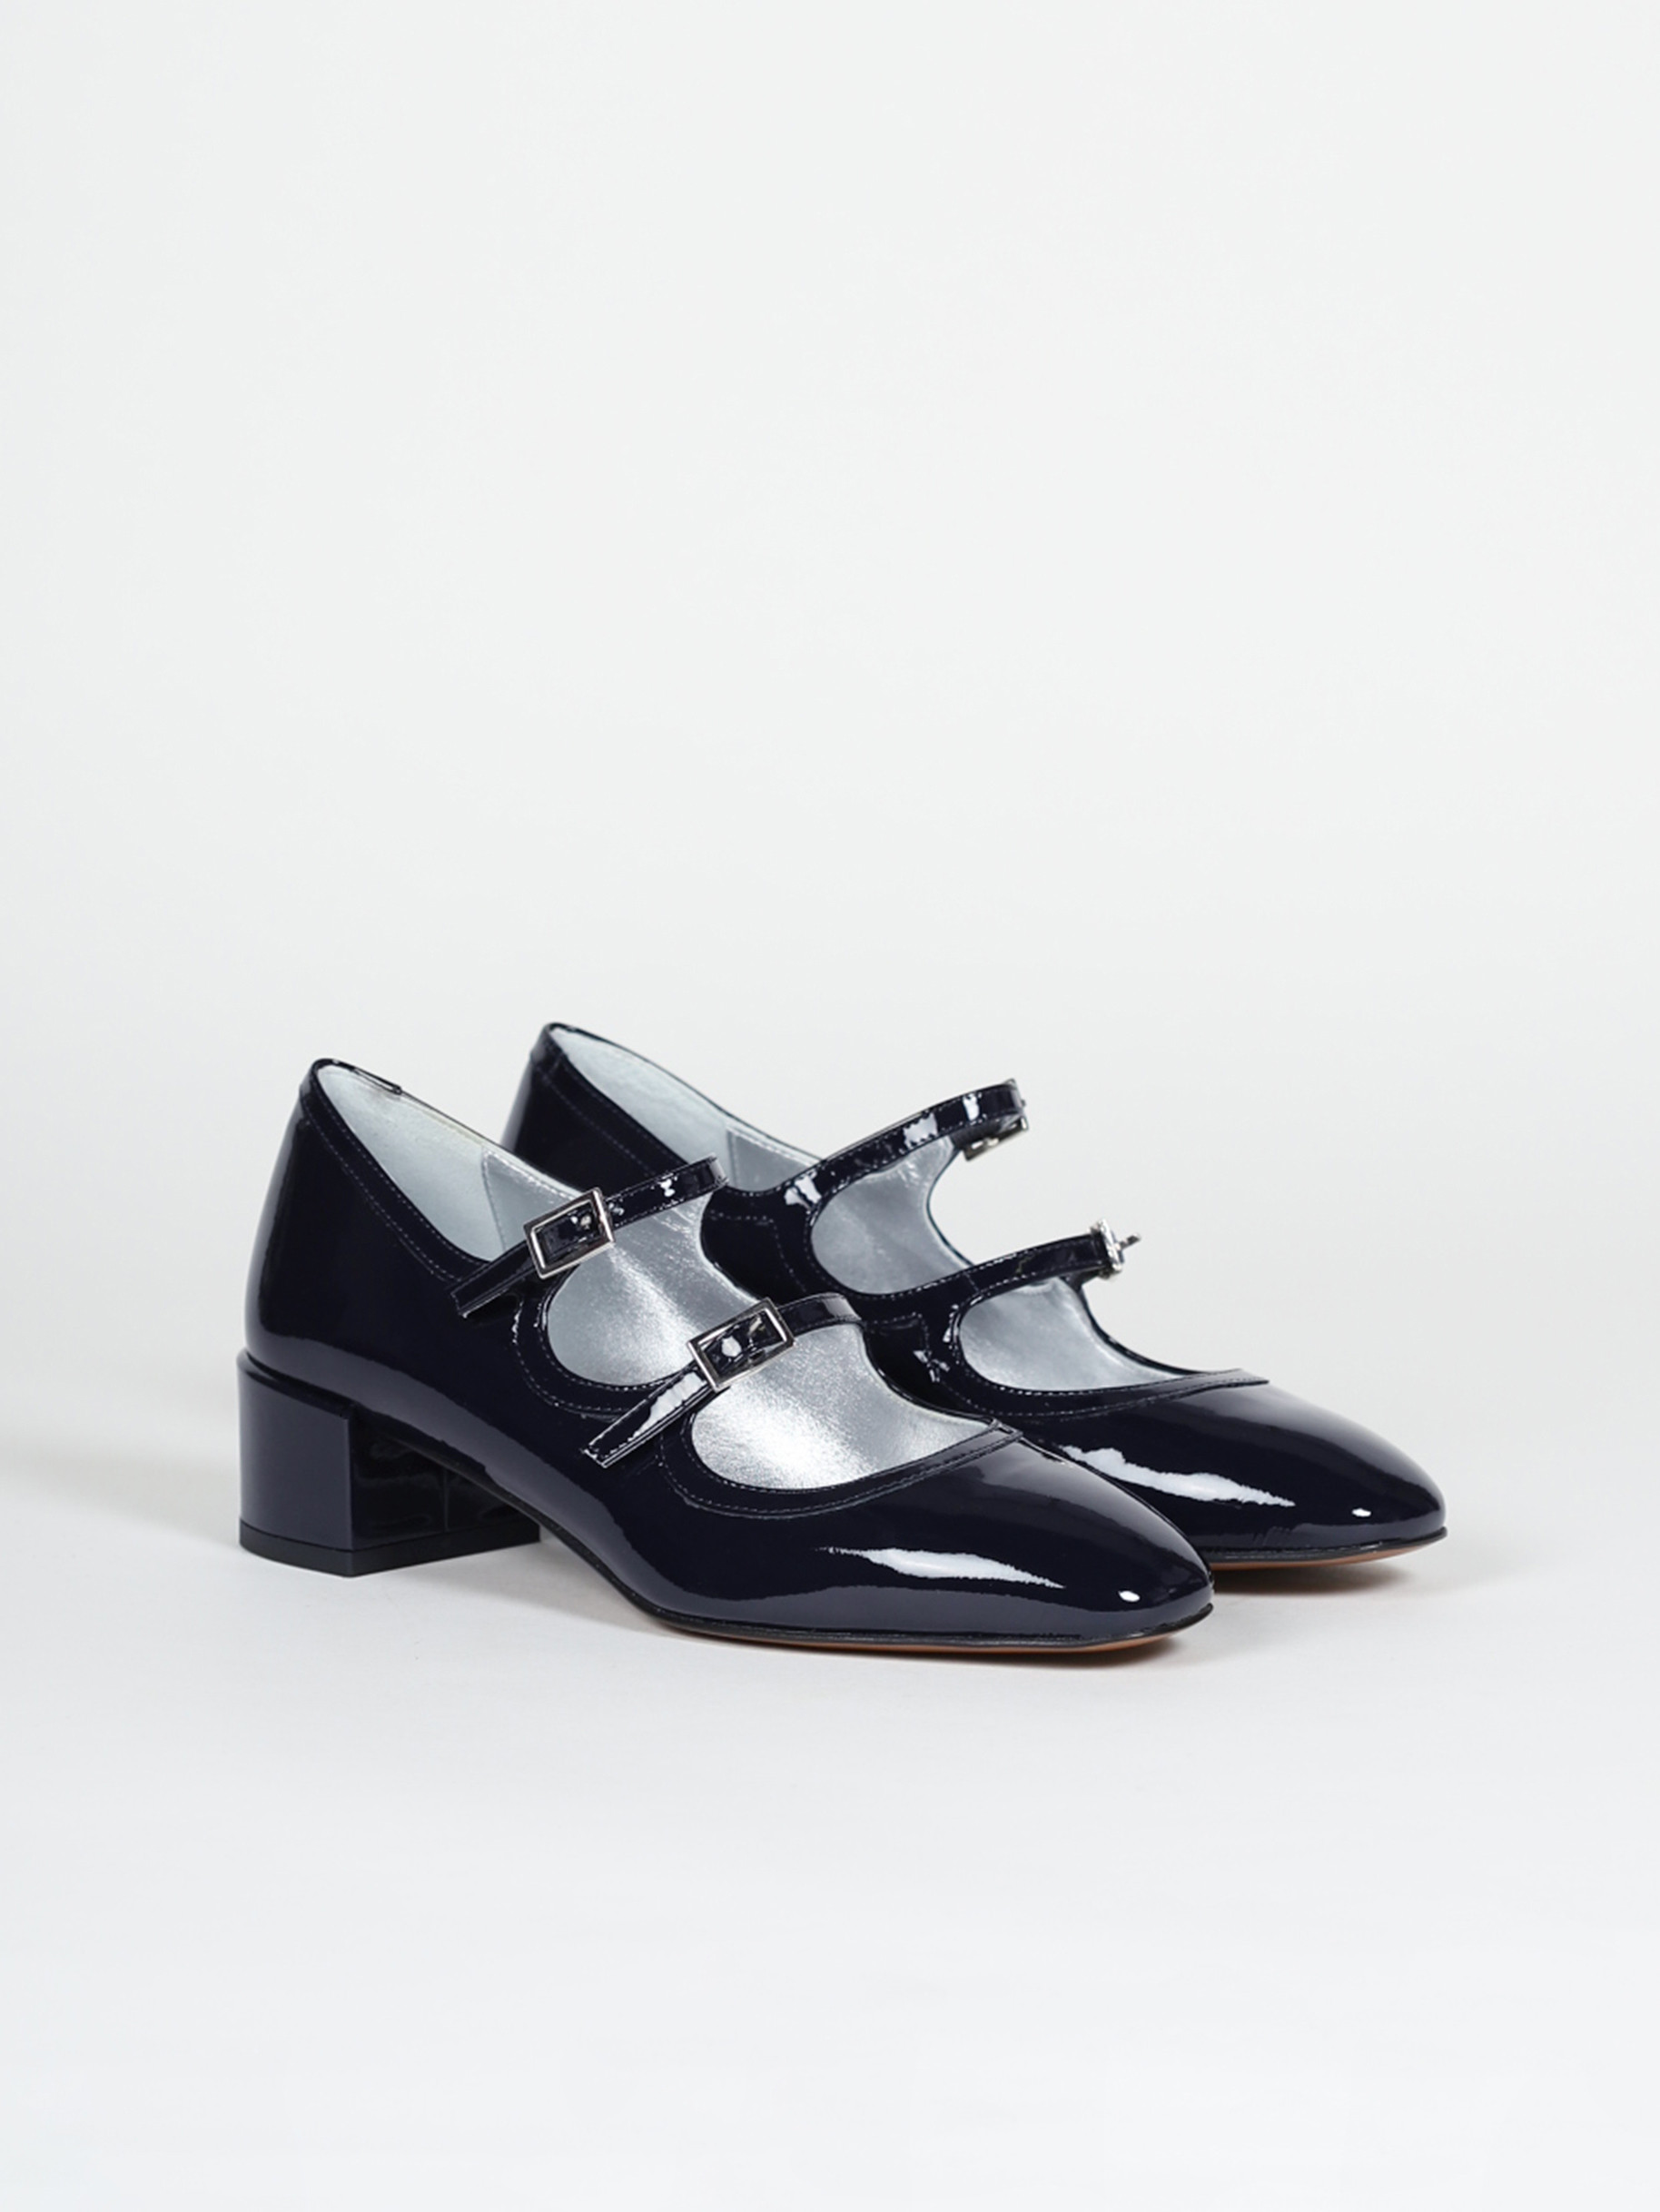 Blue patent leather mary janes